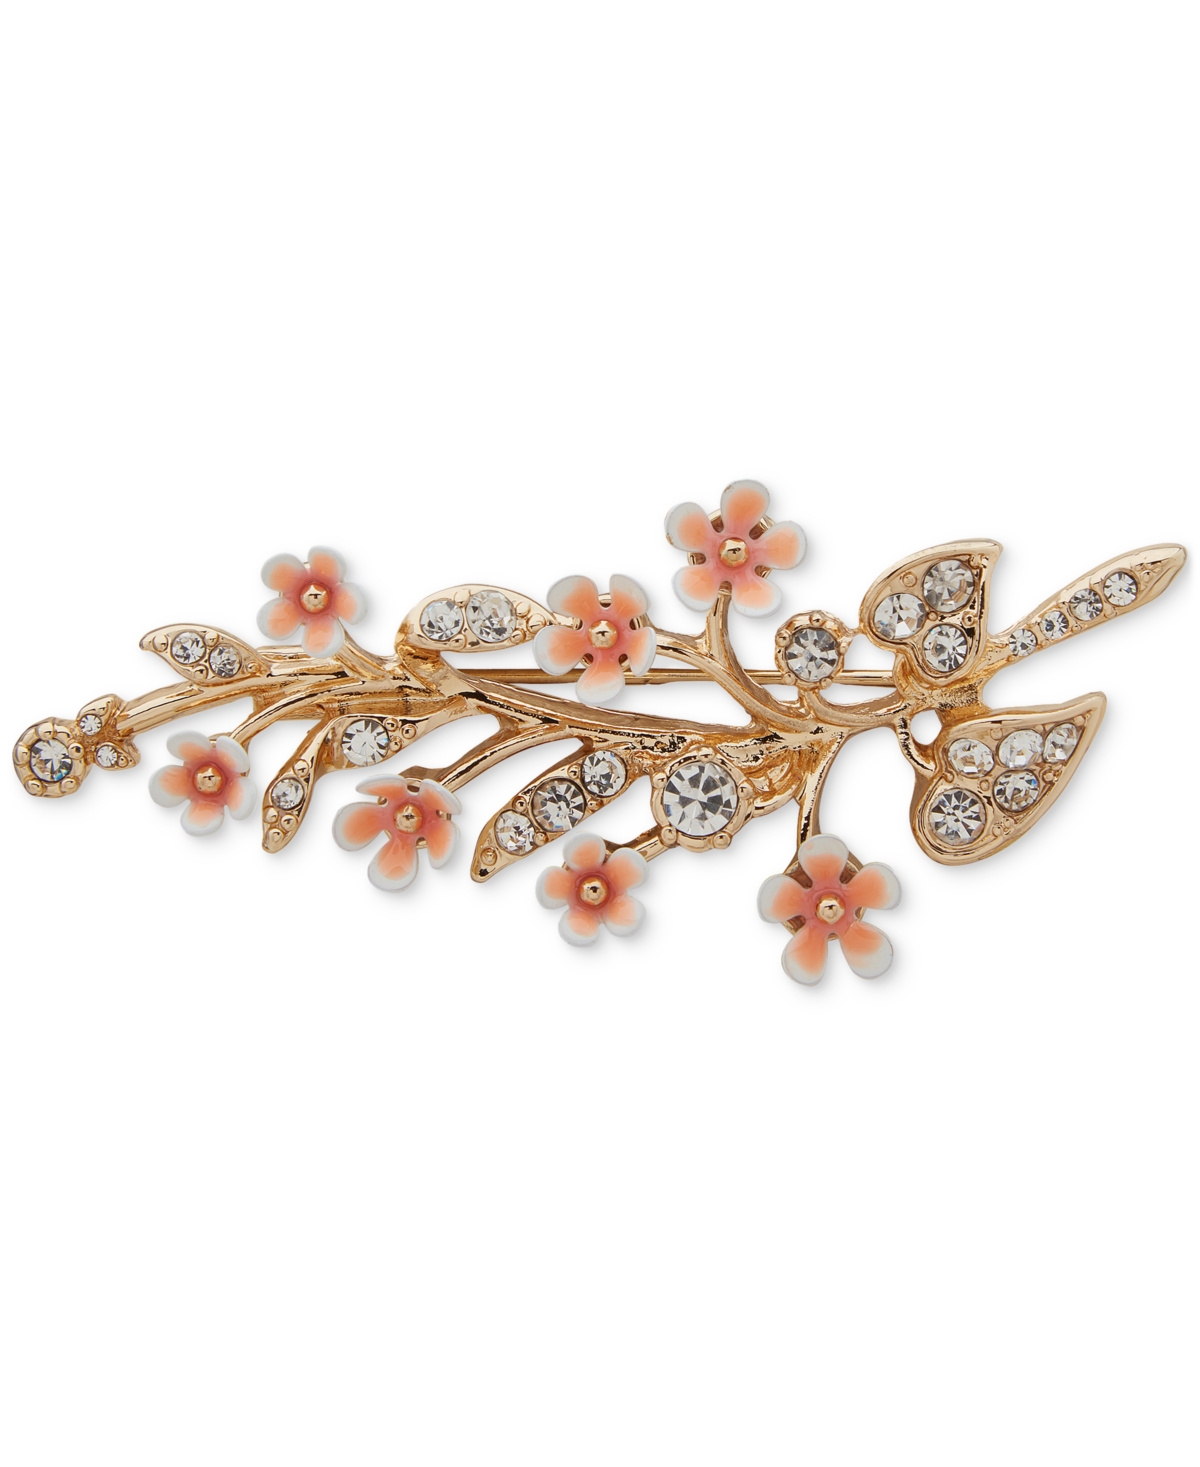 Gold-Tone Crystal & Pink Flower Sprig Pin - Ivory